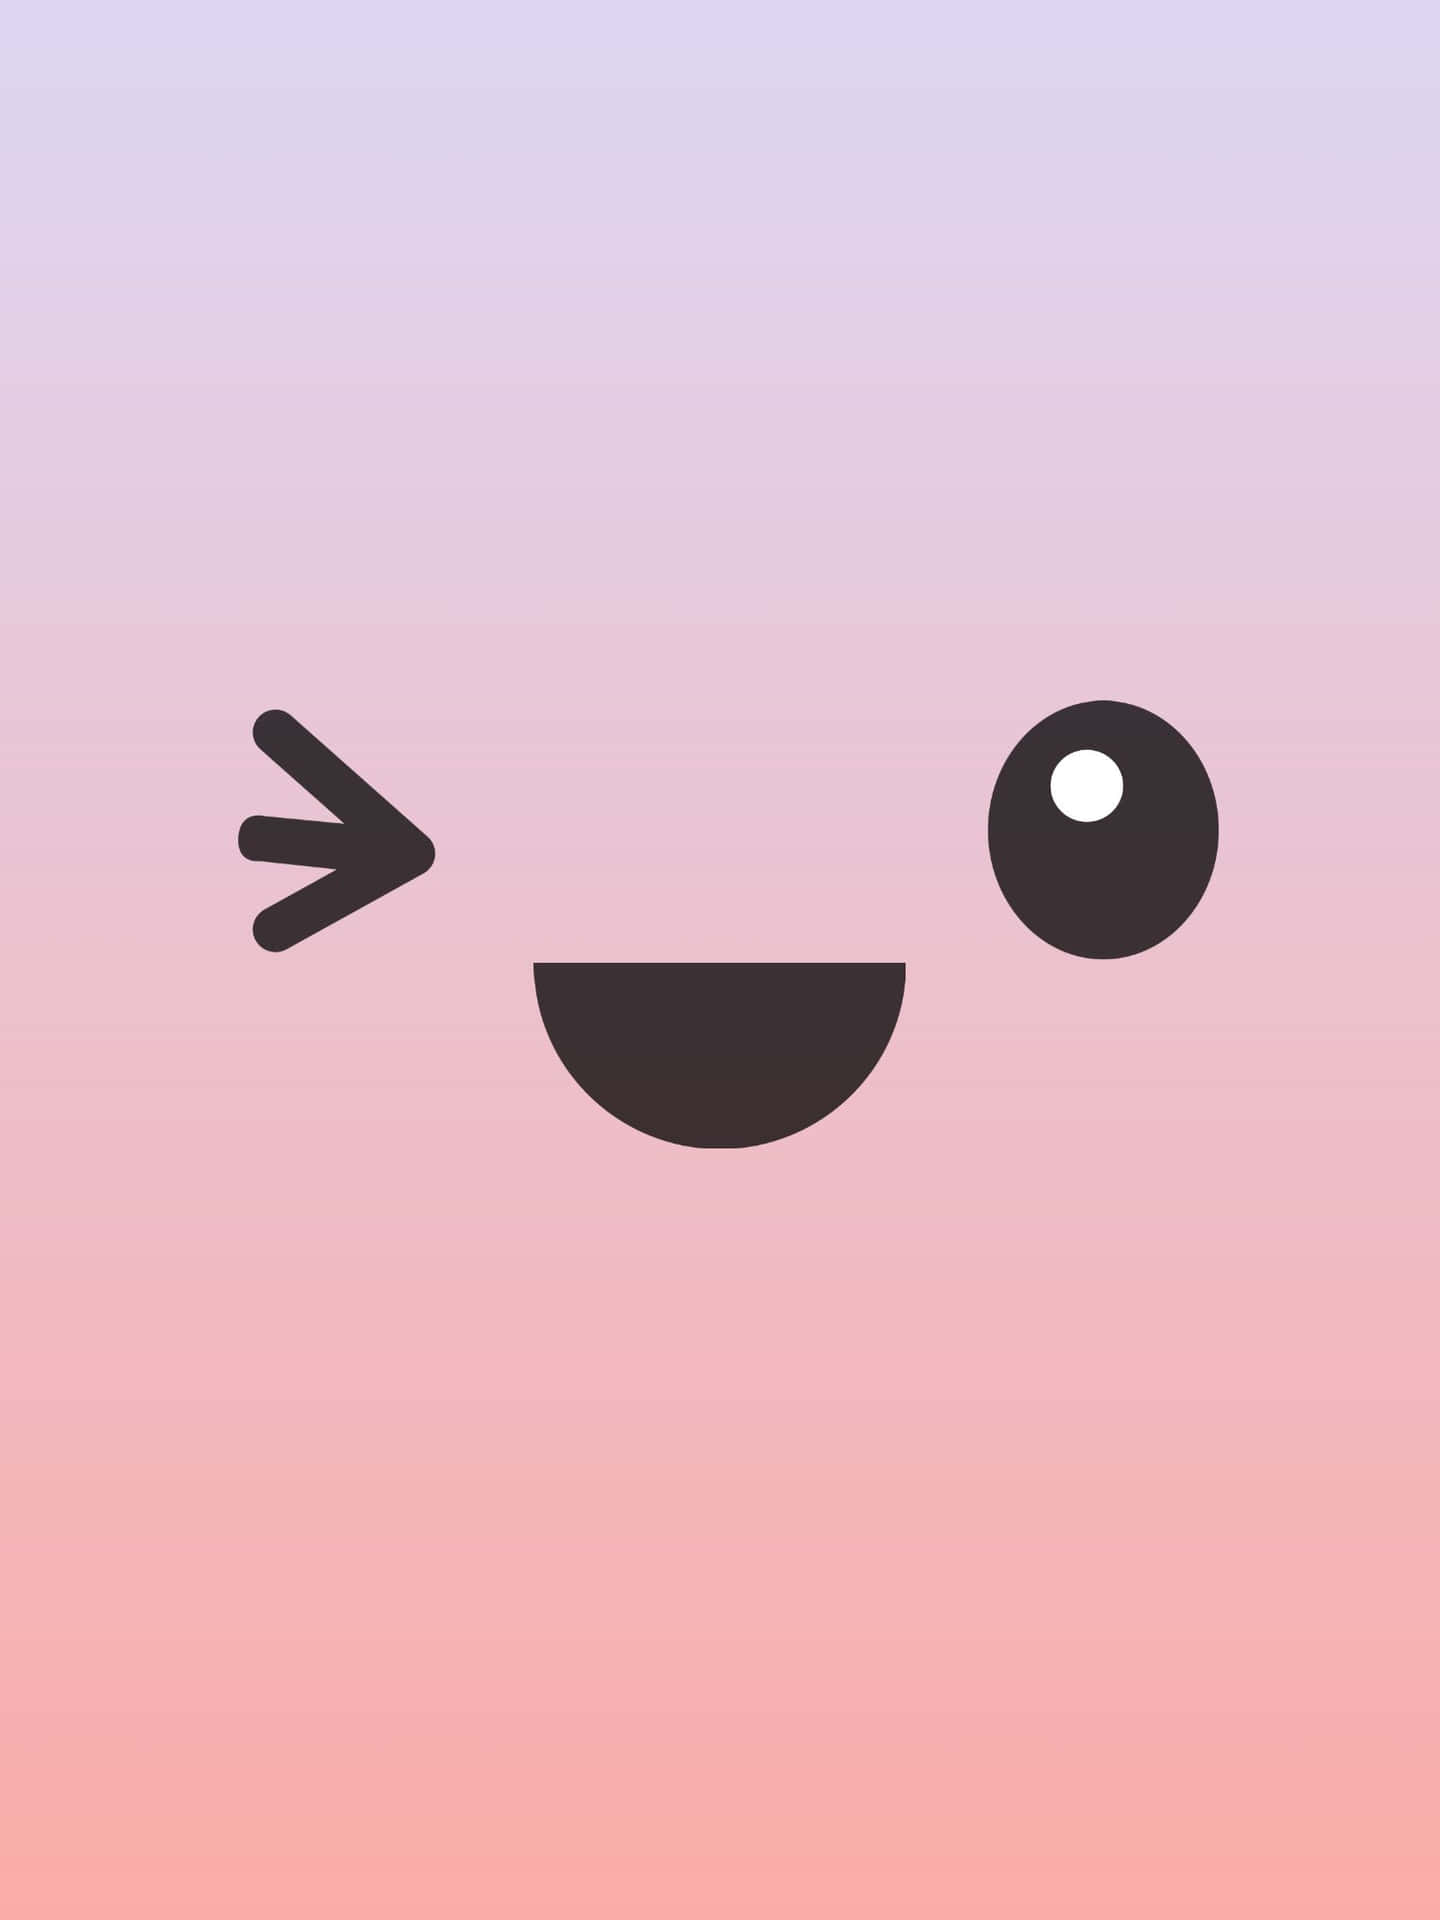 Download Kawaii Emoticon on Pink Background Wallpaper | Wallpapers.com